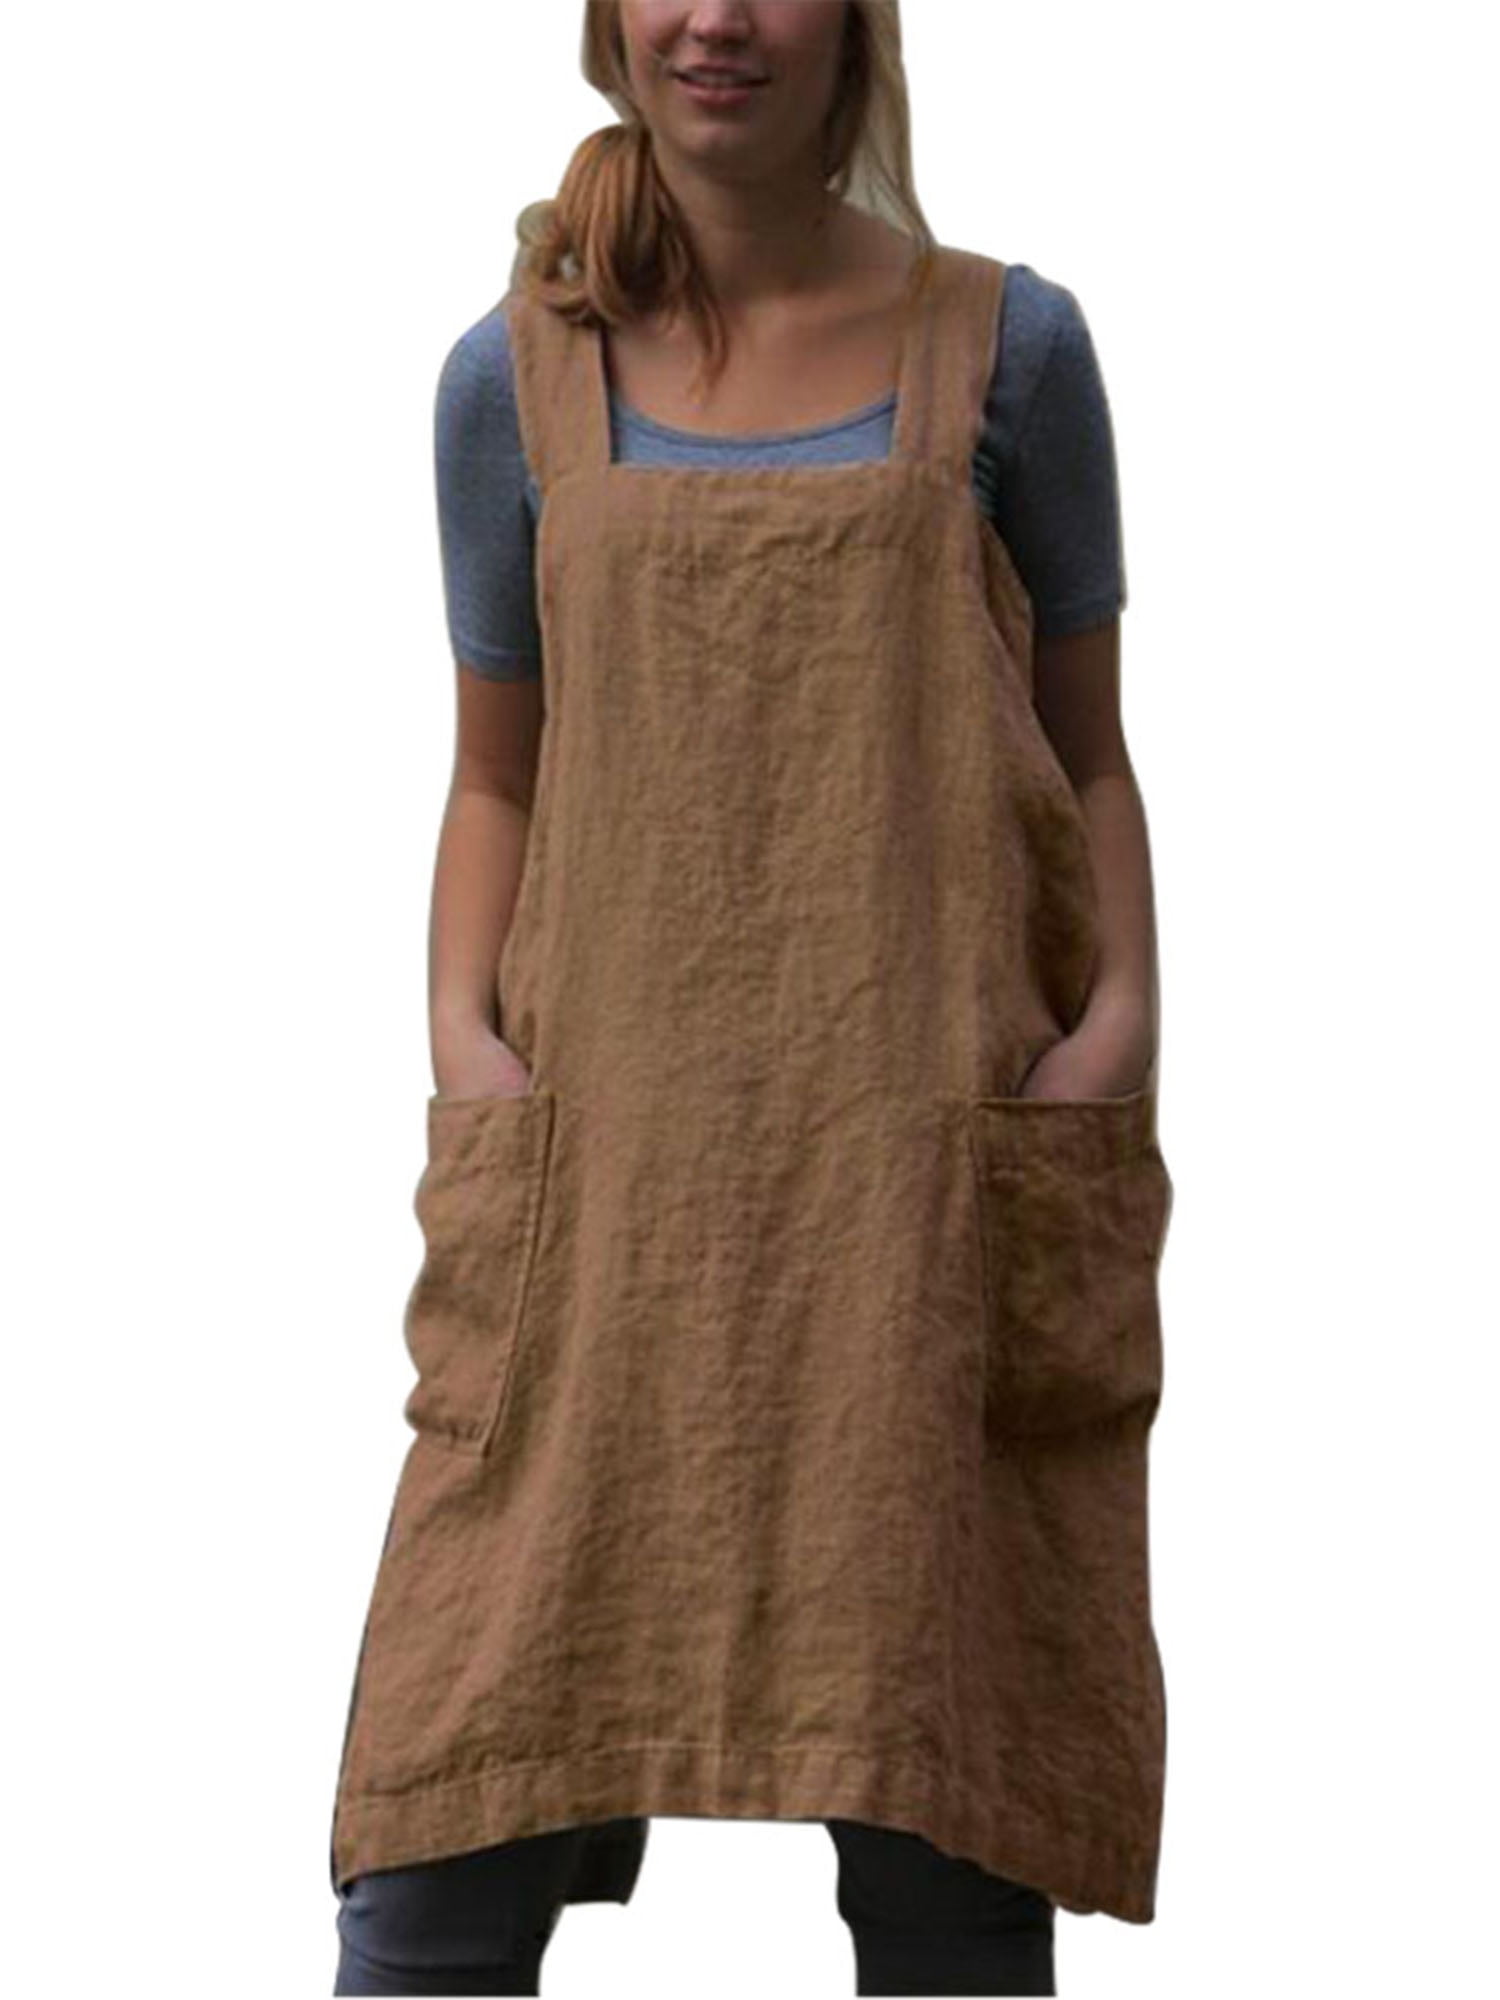 Women’s Pinafore Square Apron Baking Cooking Gardening Works Cross Back Cotton/Linen Blend Dress with 2 Pockets